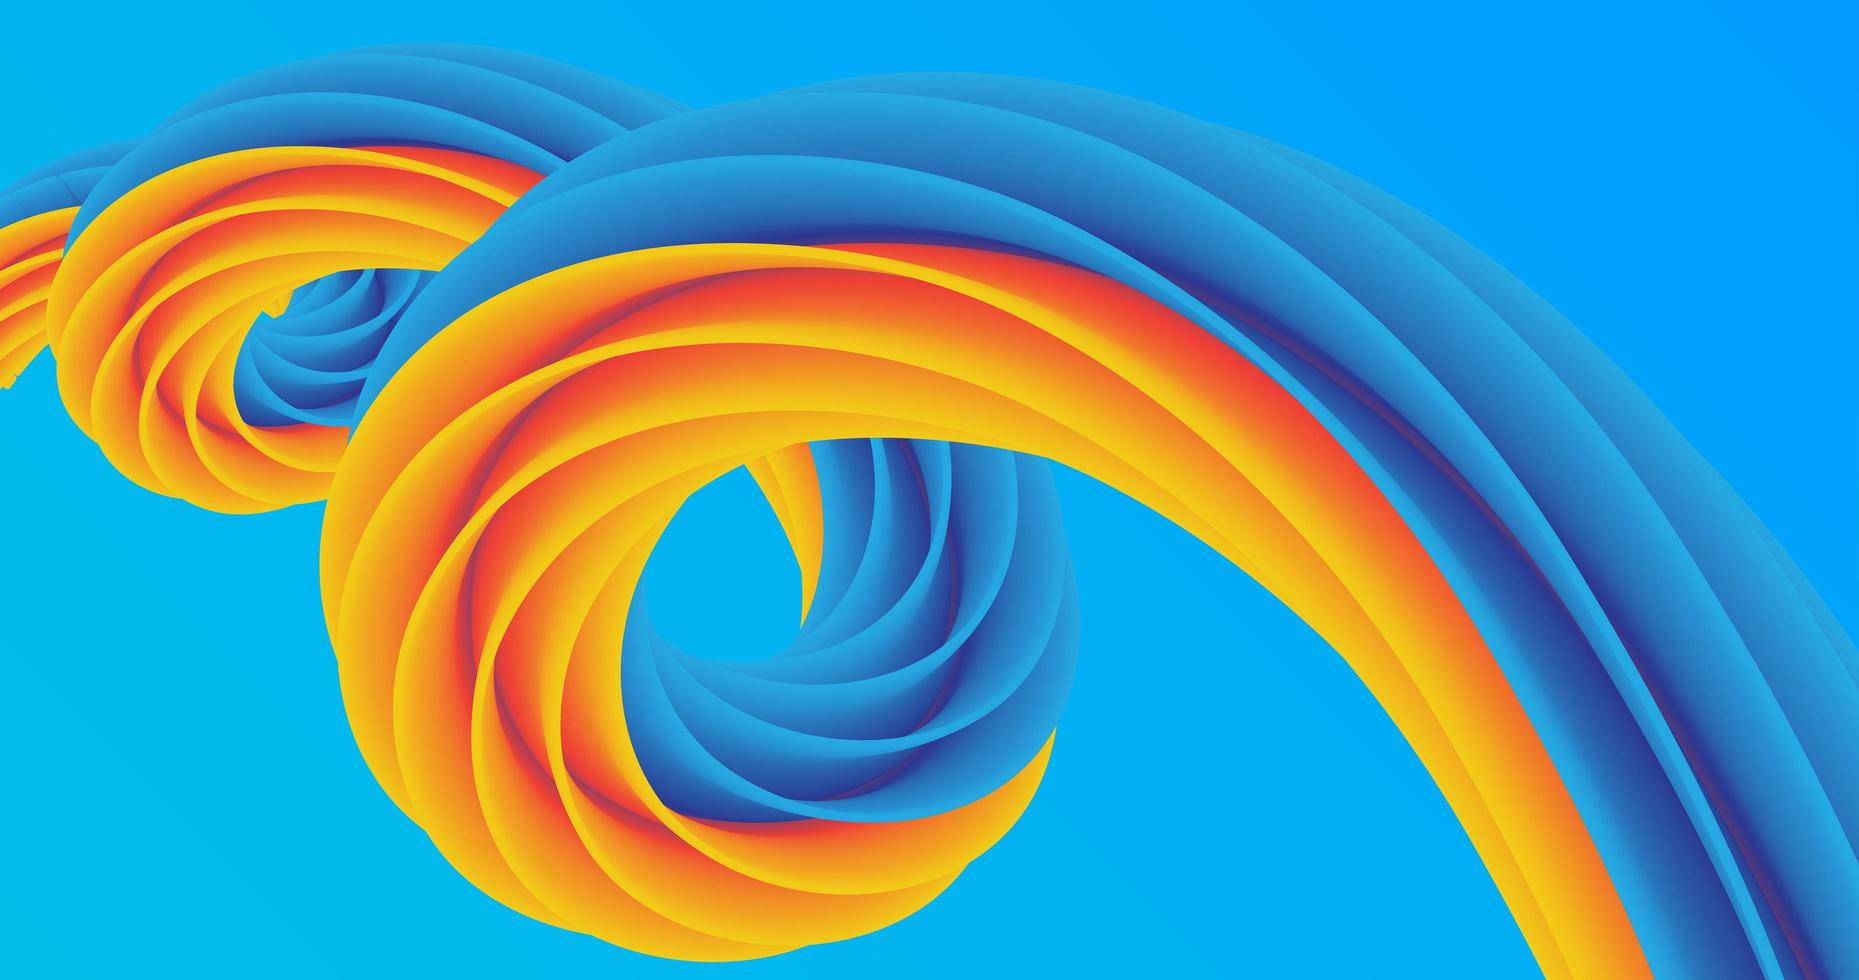 Abstract background using 3d wave pattern resembling a rope and in blue-yellow color photo